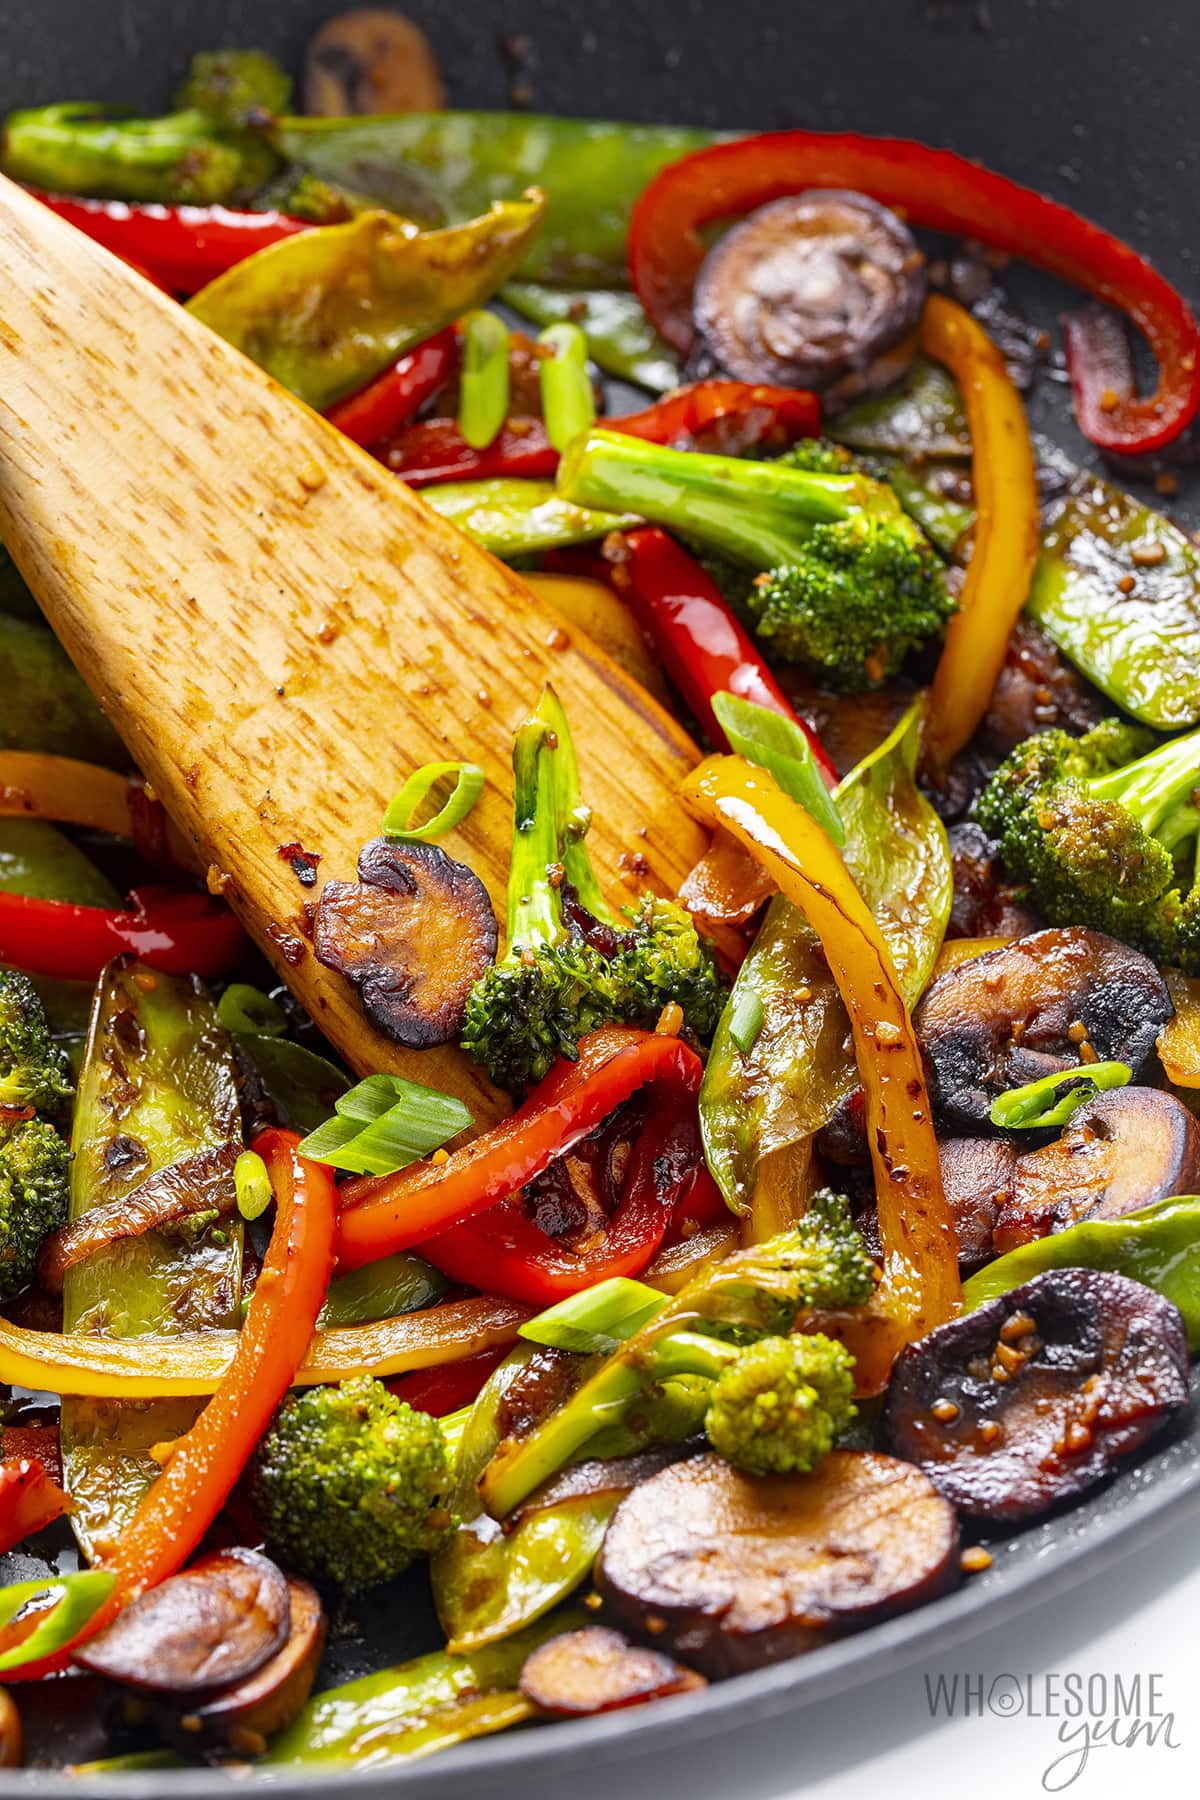 Stir fry vegetables in a wok with a wooden spoon.